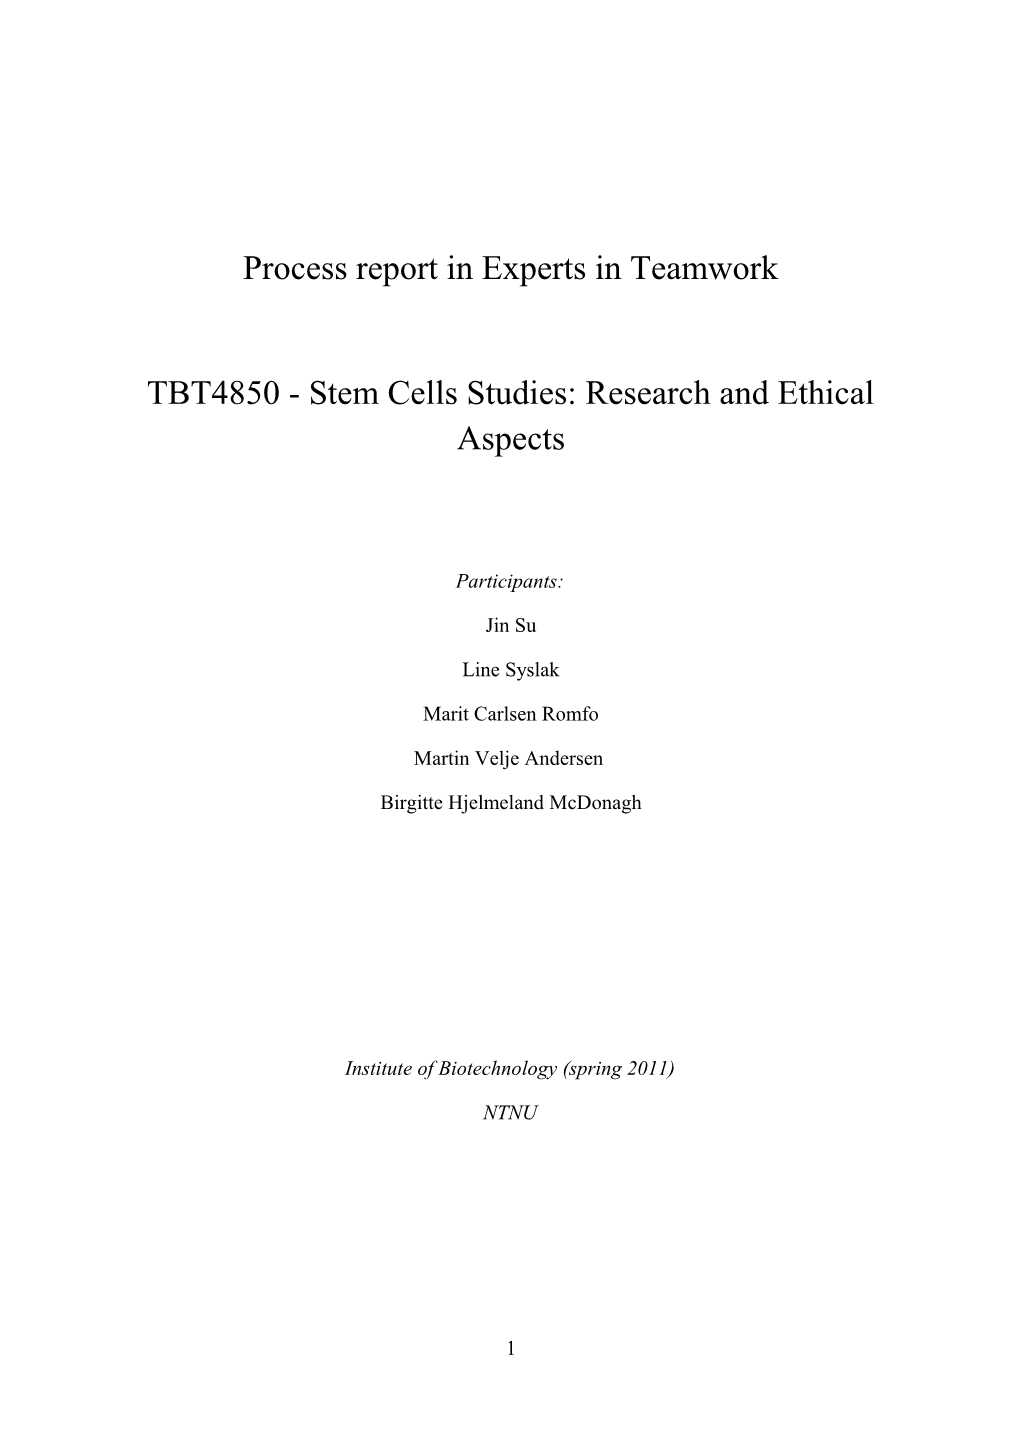 Process Report in Experts in Teamwork